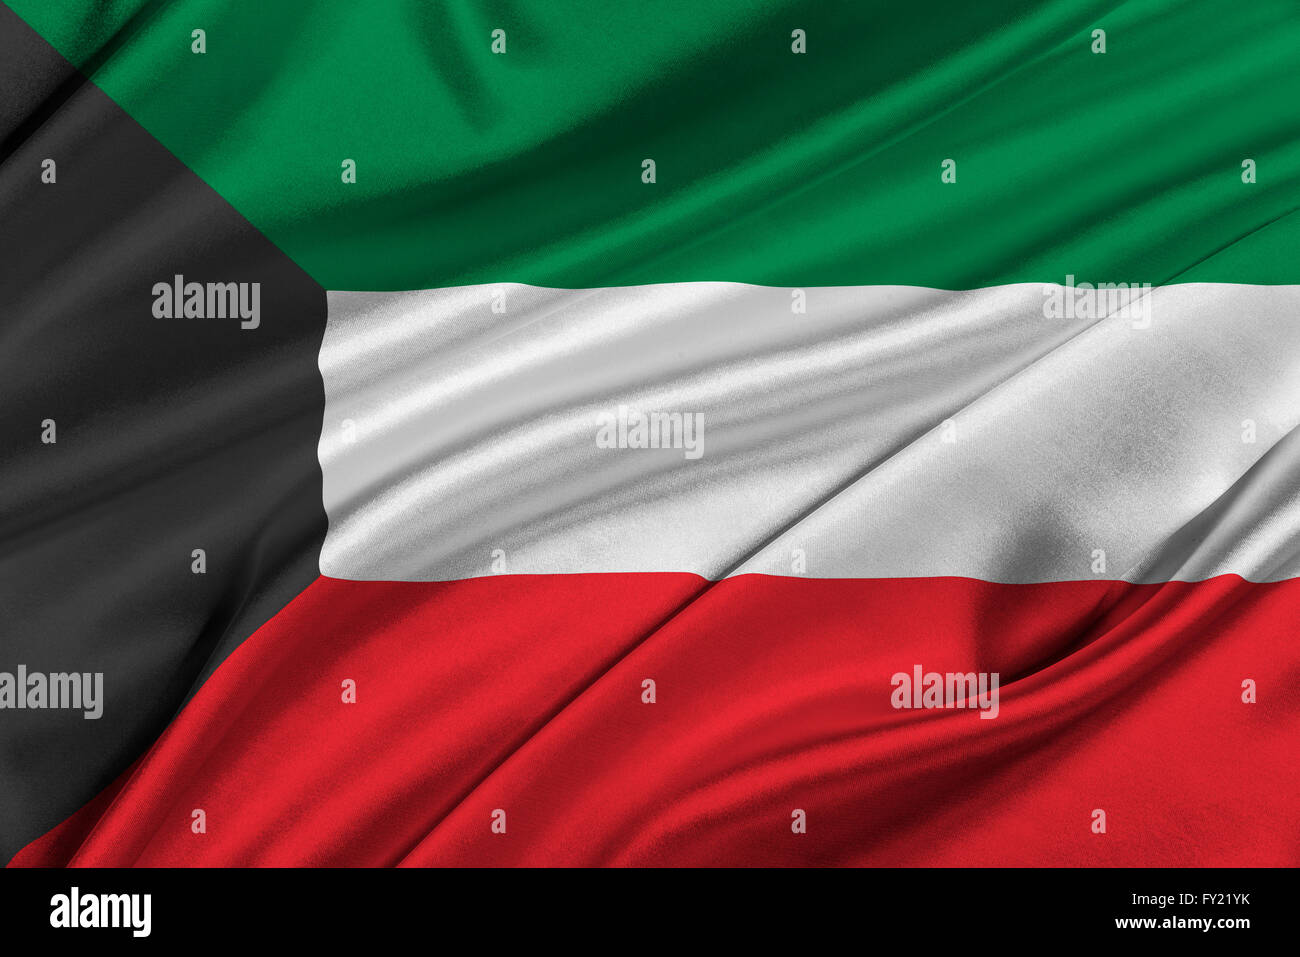 Flag of Kuwait waving in the wind. Stock Photo